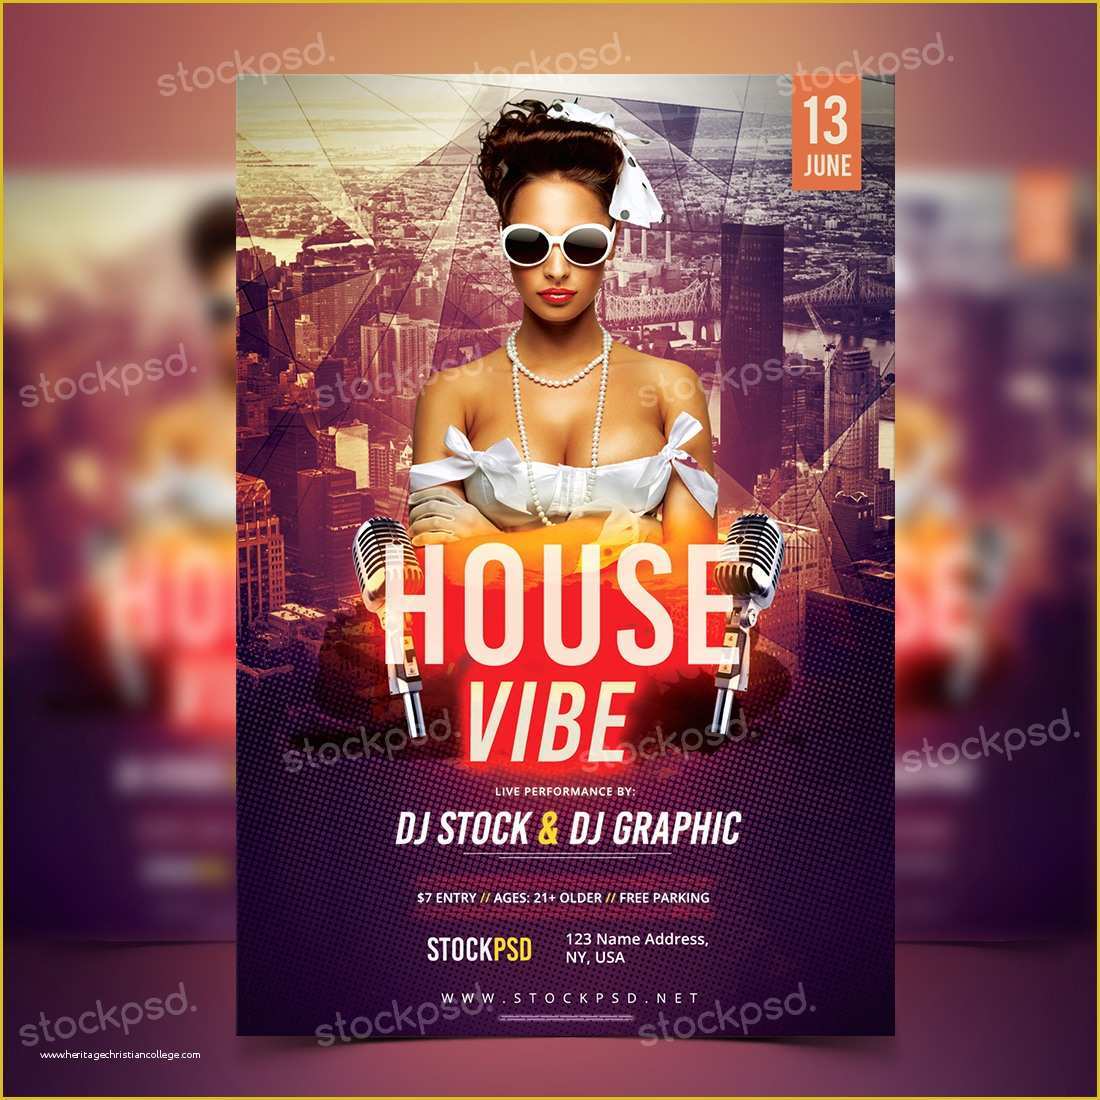 Free Flyer Design Templates Of House Vibe Free Psd Flyer Template Free Psd Flyer